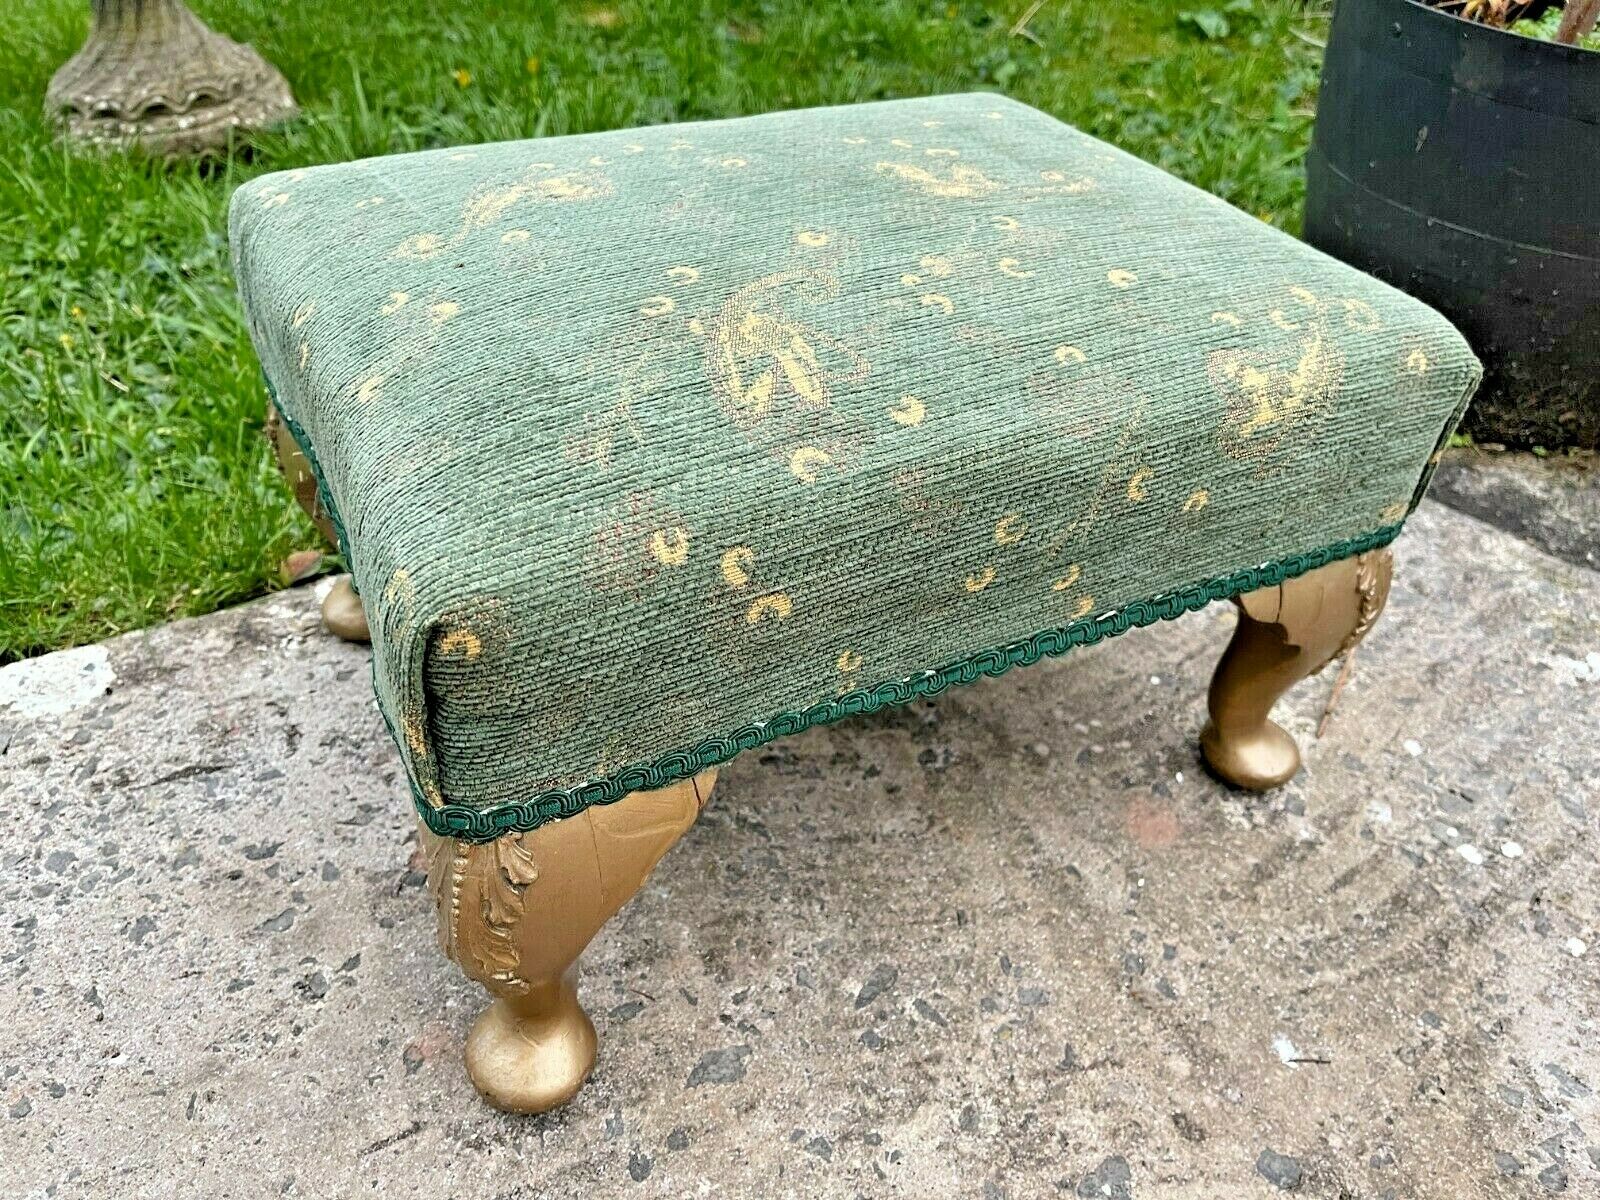 Vintage Wooden Footstool Foot-Rest Green & Gold Tapestry Design - 10in Tall